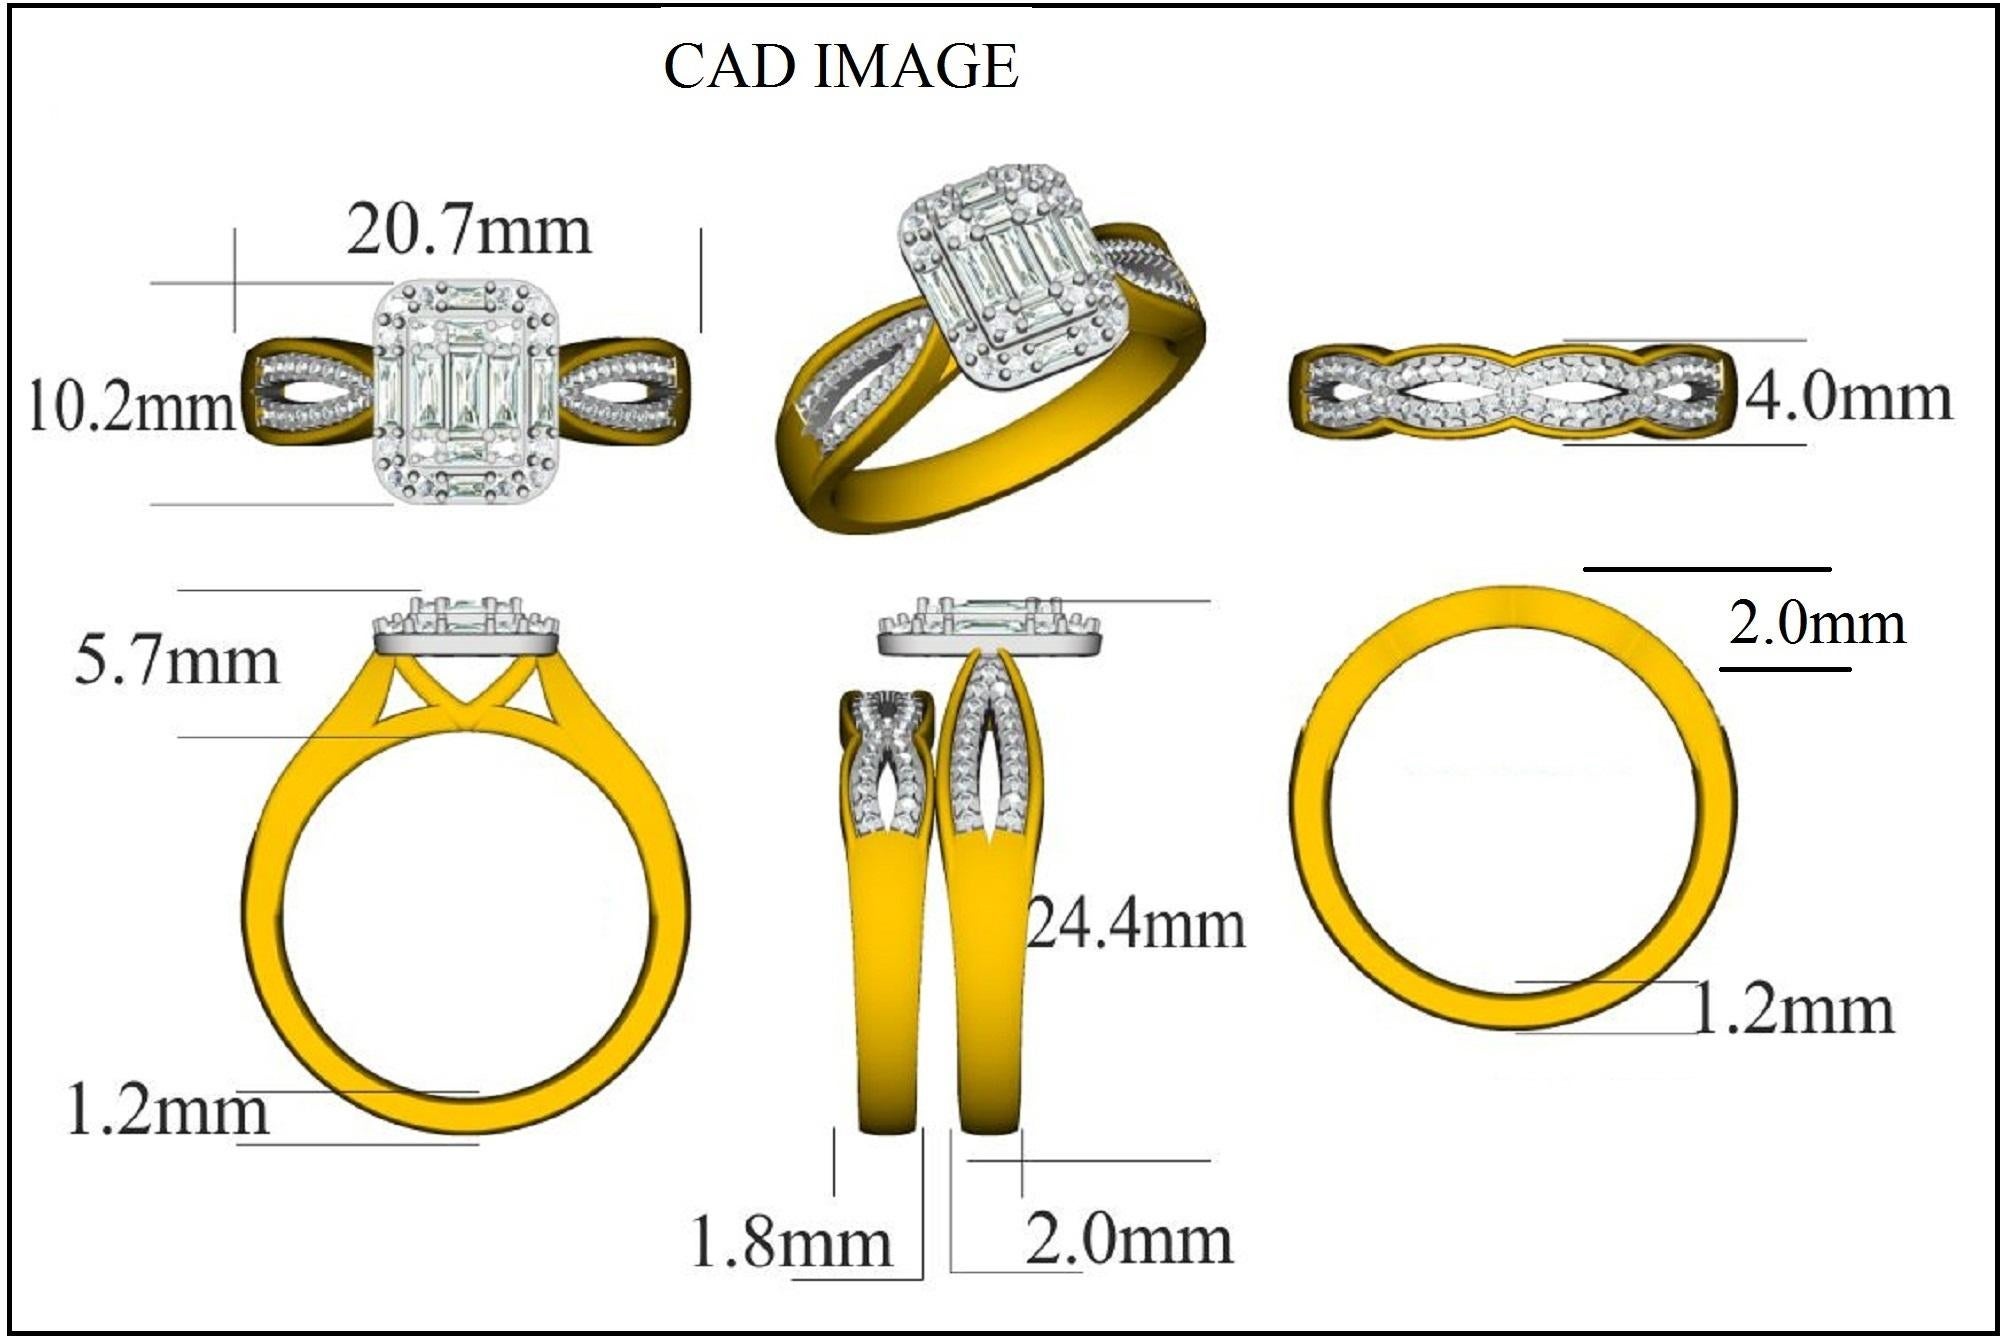 Express your love with this beautiful diamond bridal set. The ring is crafted from 14-karat yellow gold and features Round Brilliant 106 and Baguette - 9 white diamonds, Micro Prong, Prong set, H-I color I2 clarity and a high polish finish complete